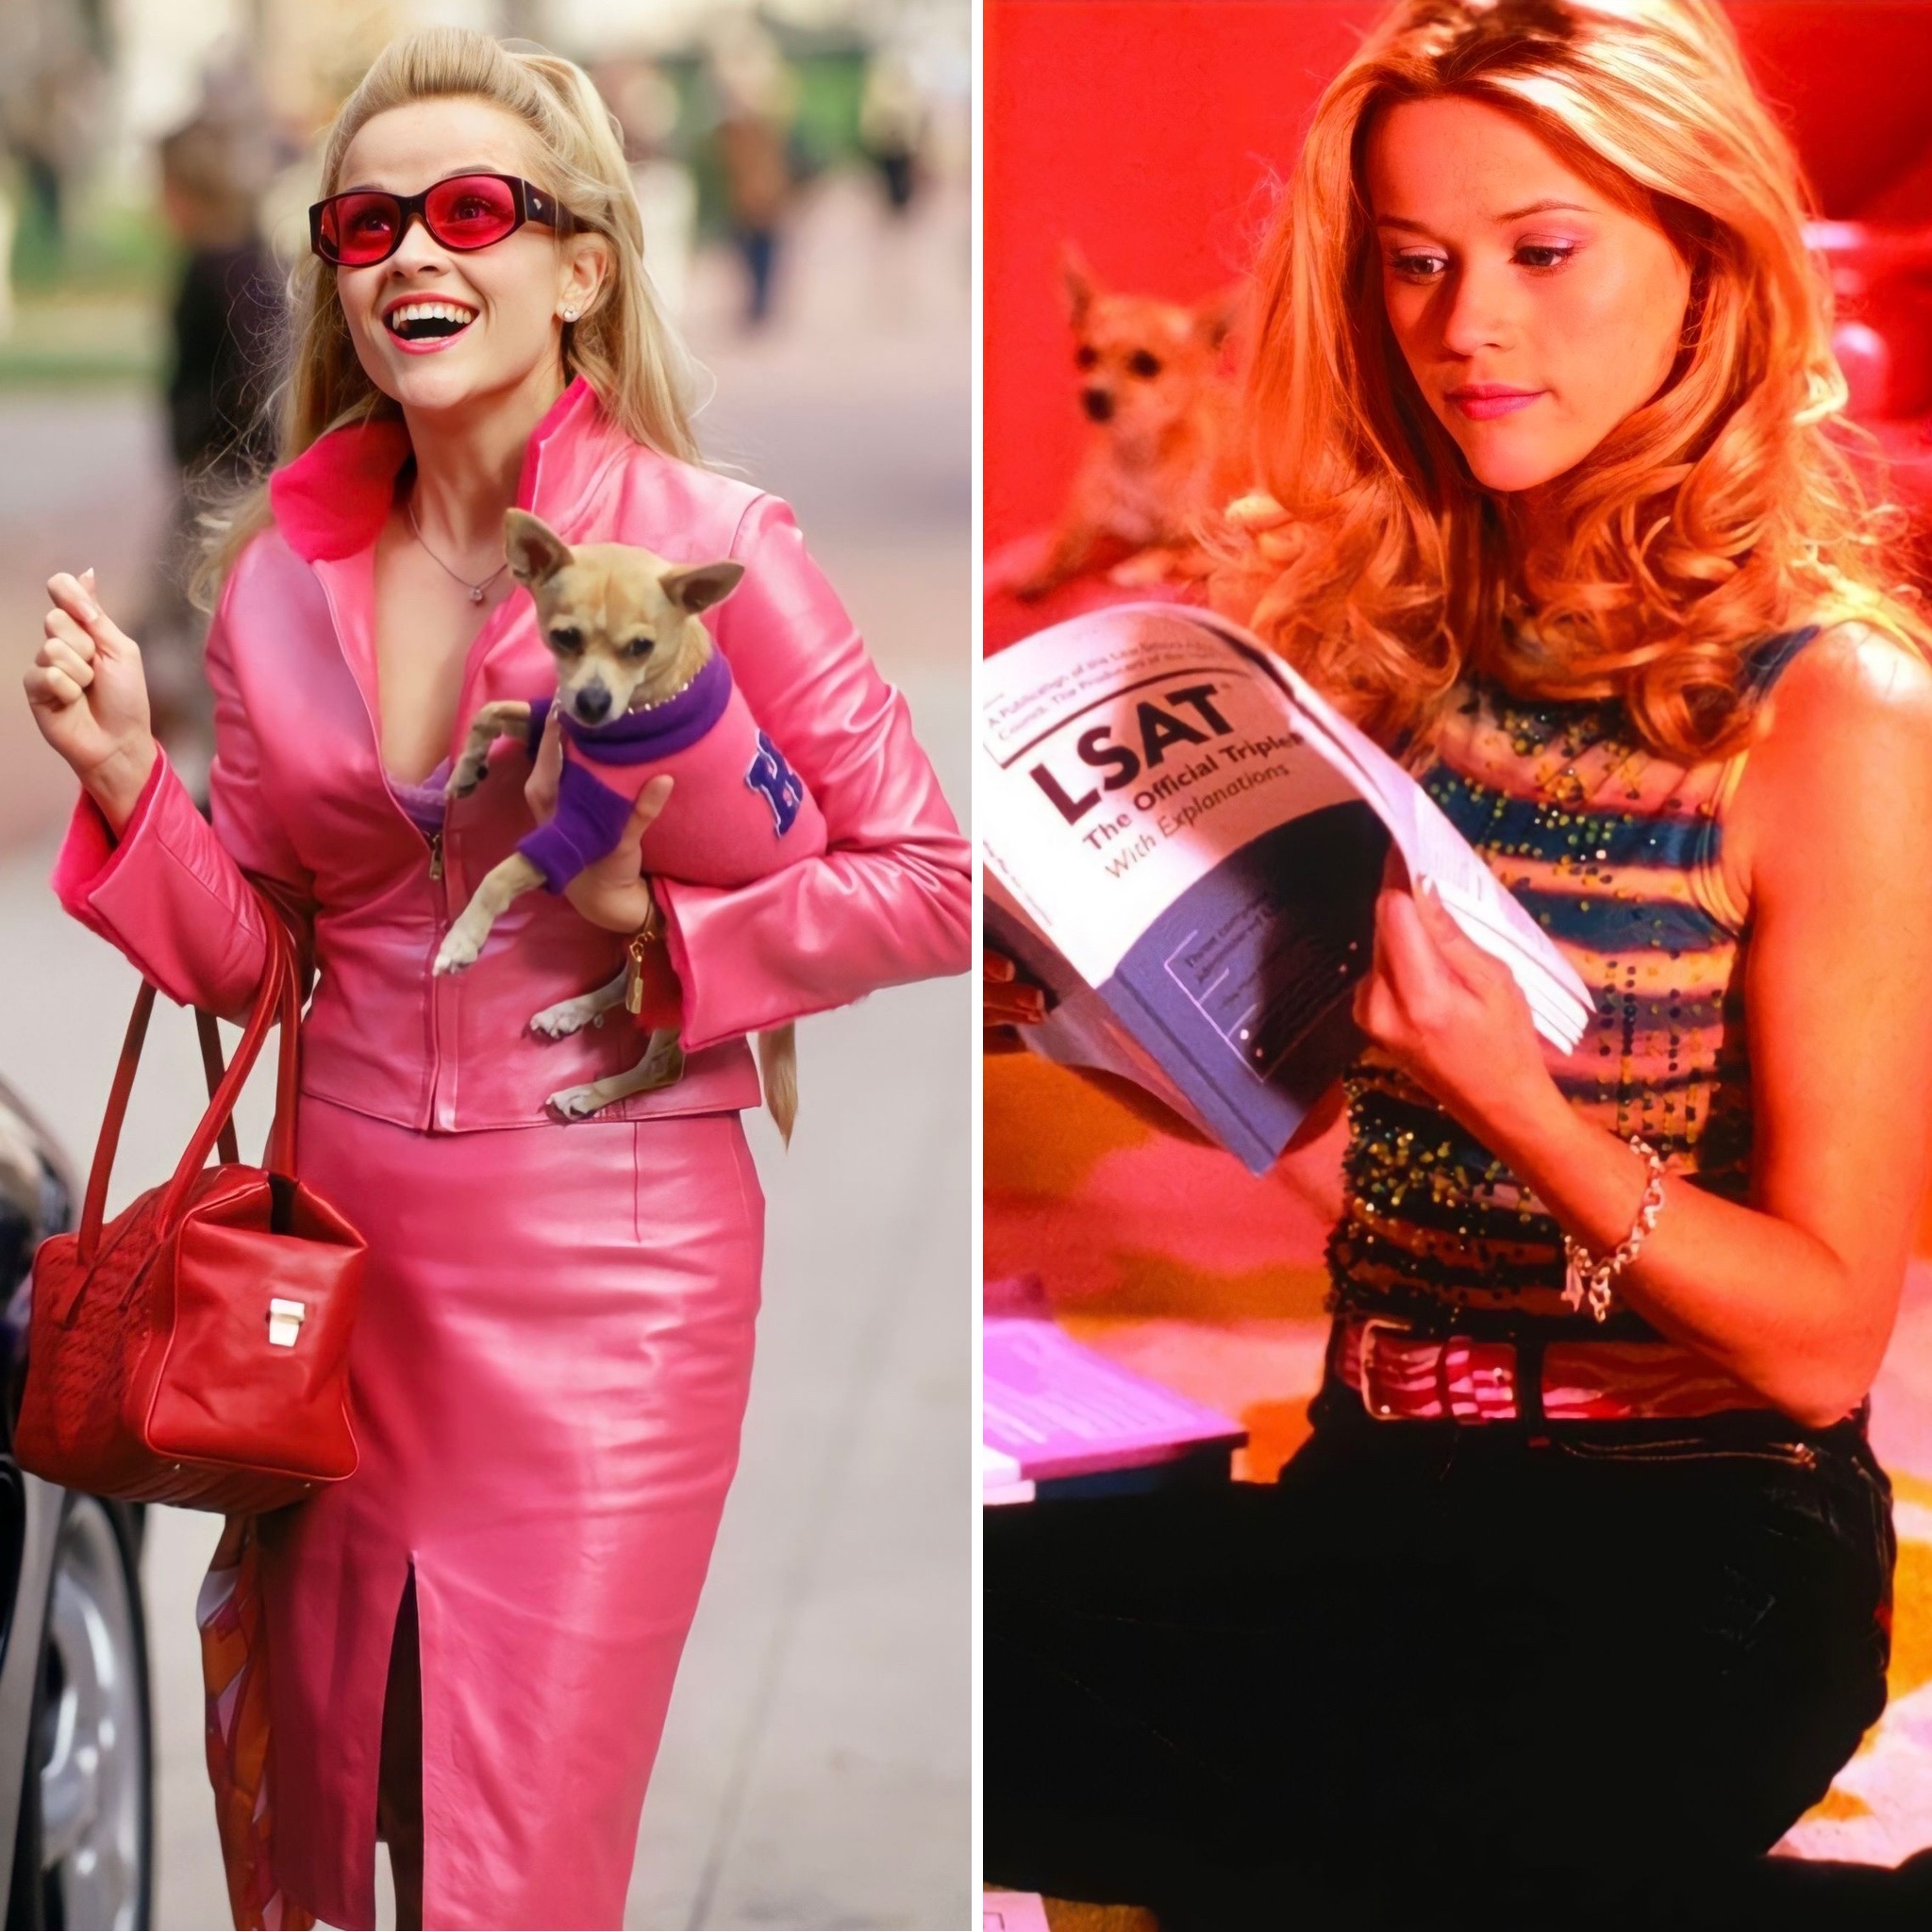 Reese Witherspoon in “Legally Blonde”